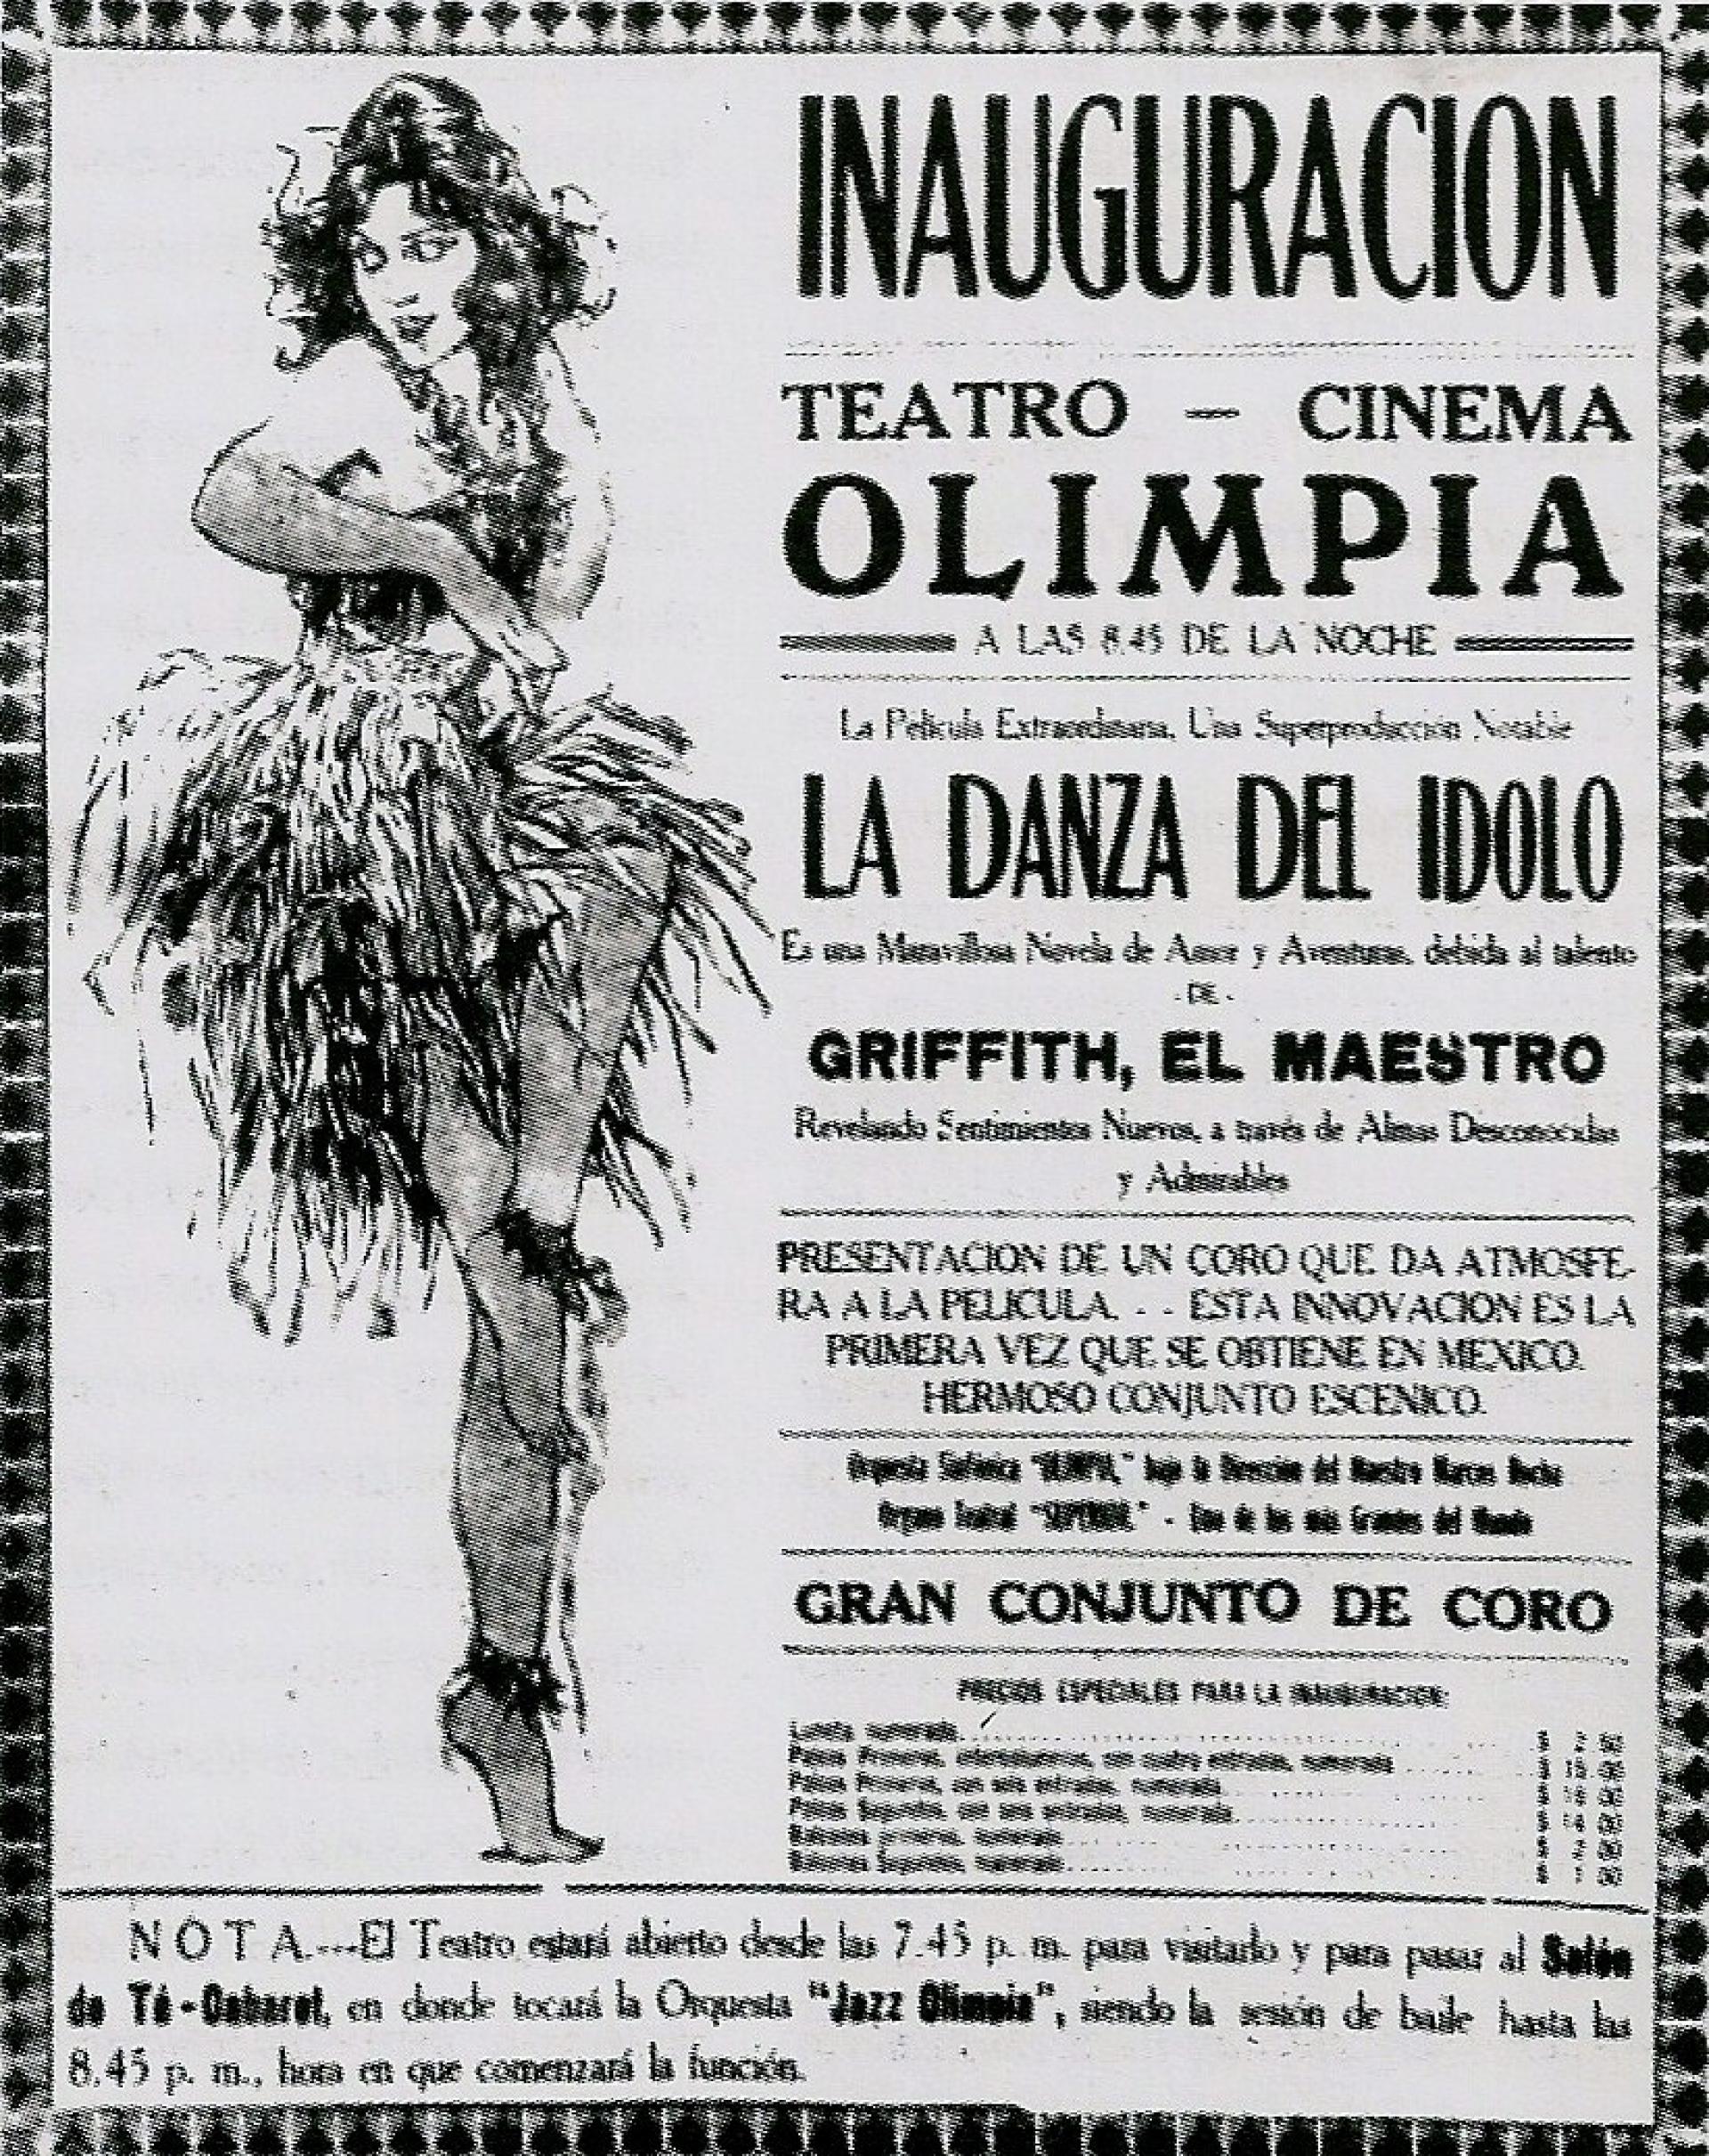 Cine Olimpia Opening Poster (1921). | Photo via Mexican Silent Cinema